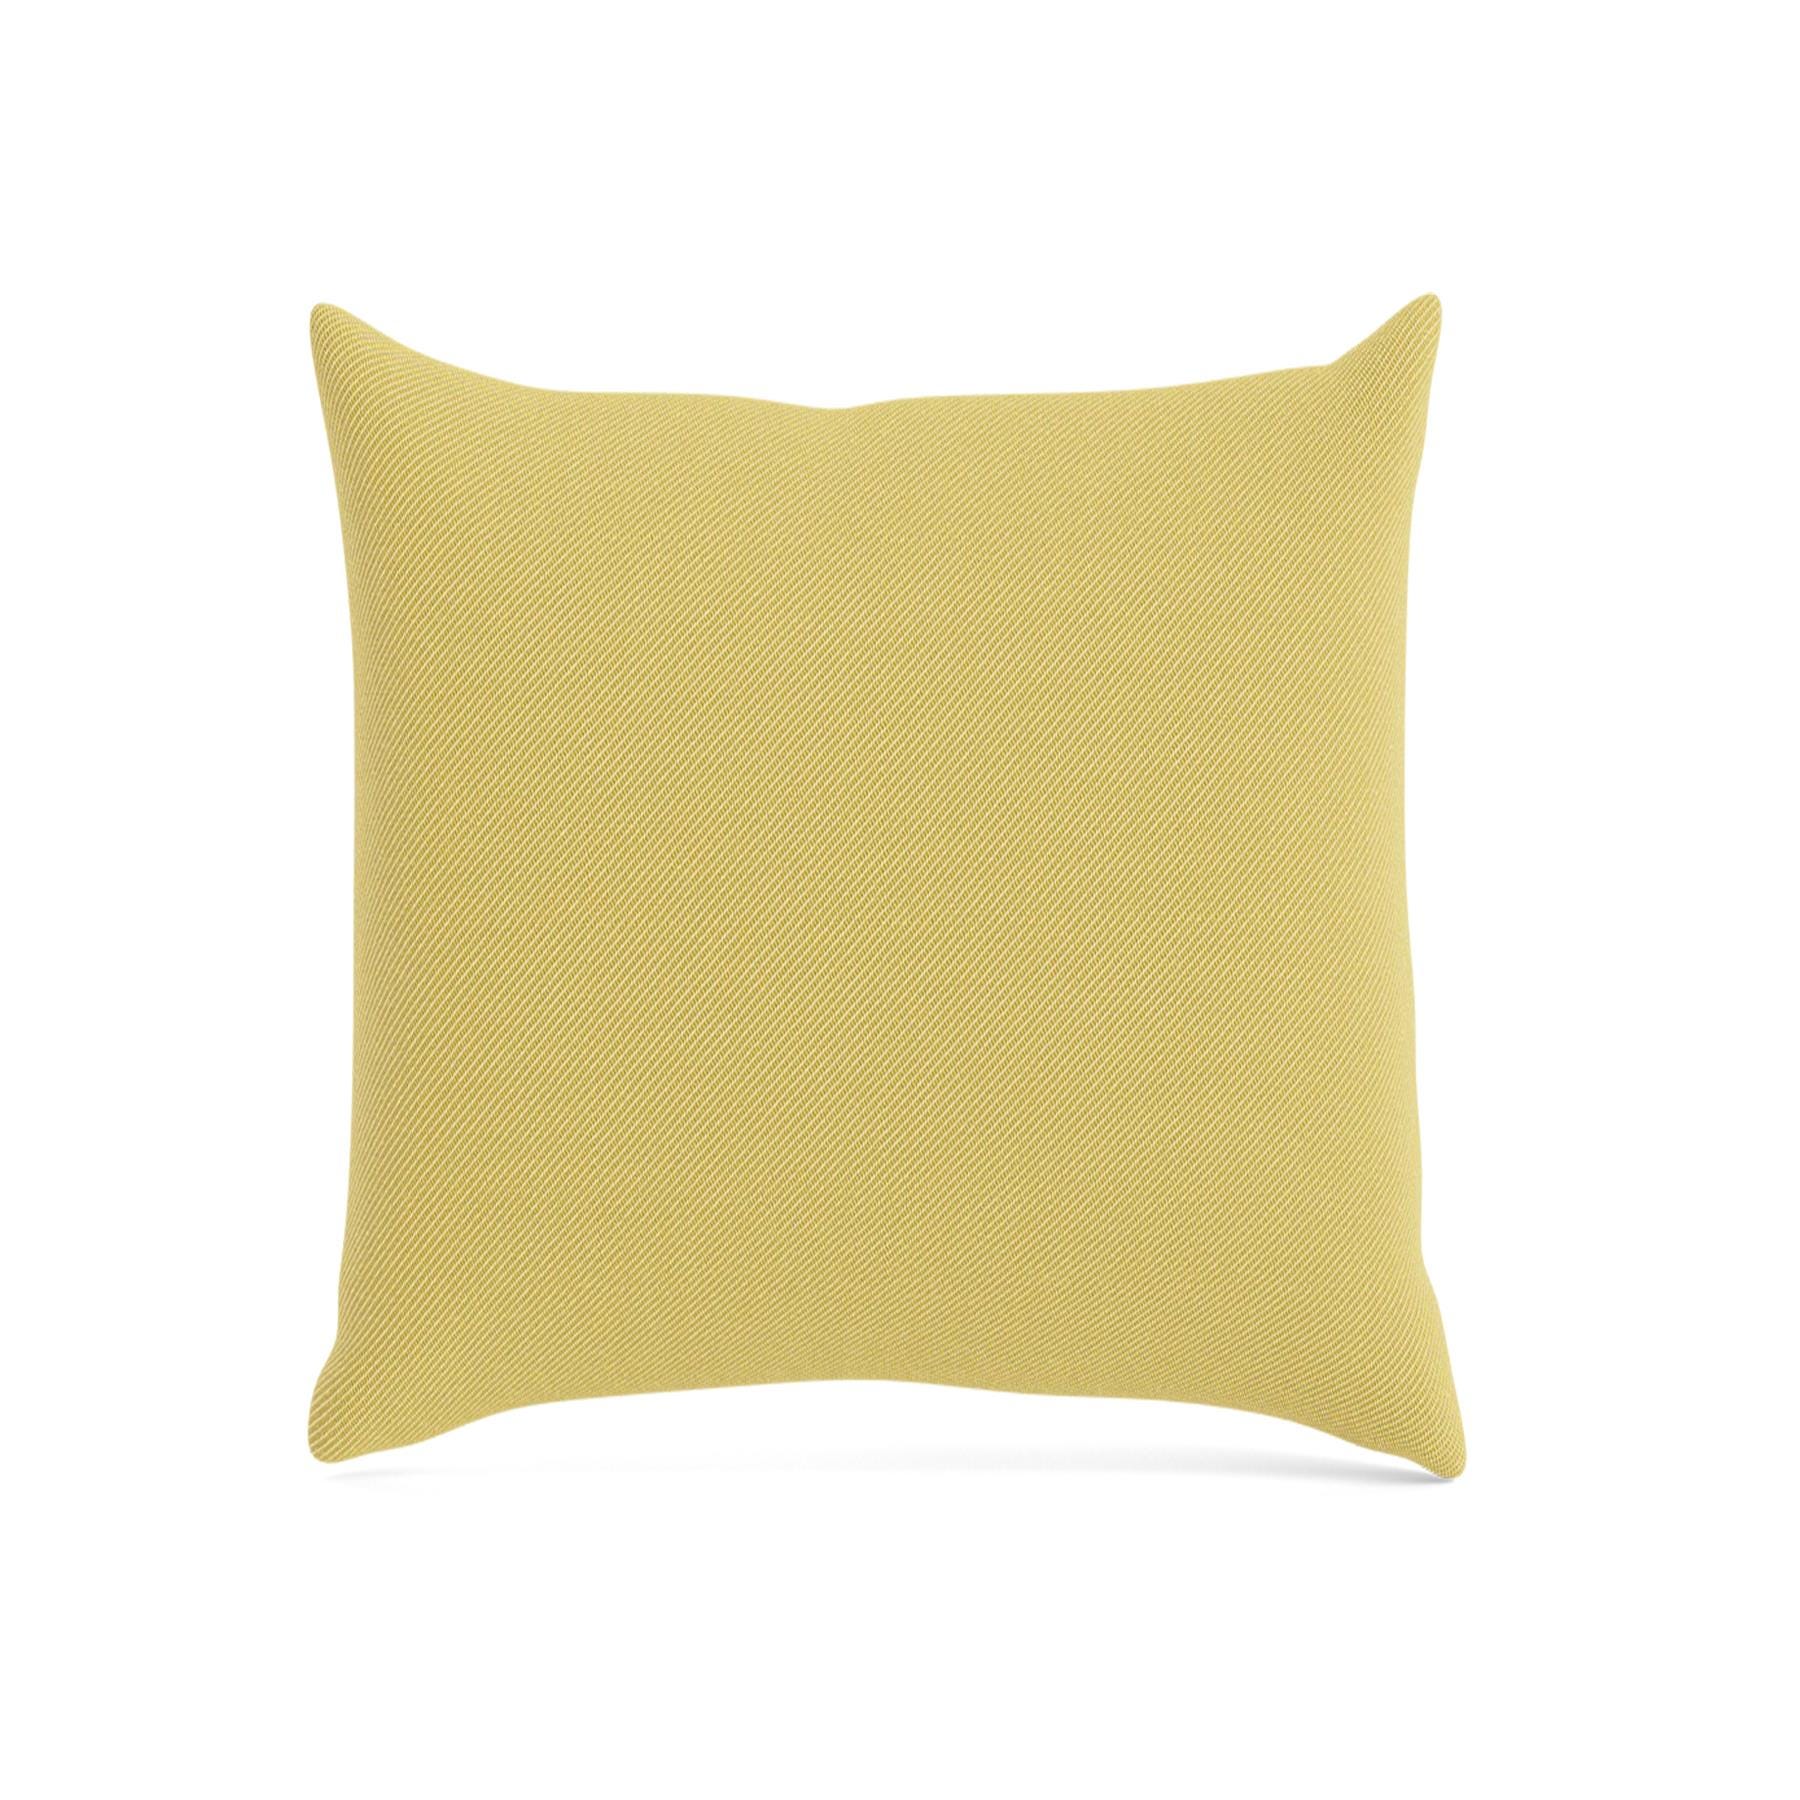 Make Nordic Pillow 50cmx50cm Twill Weave 430 Down And Fibers Yellow